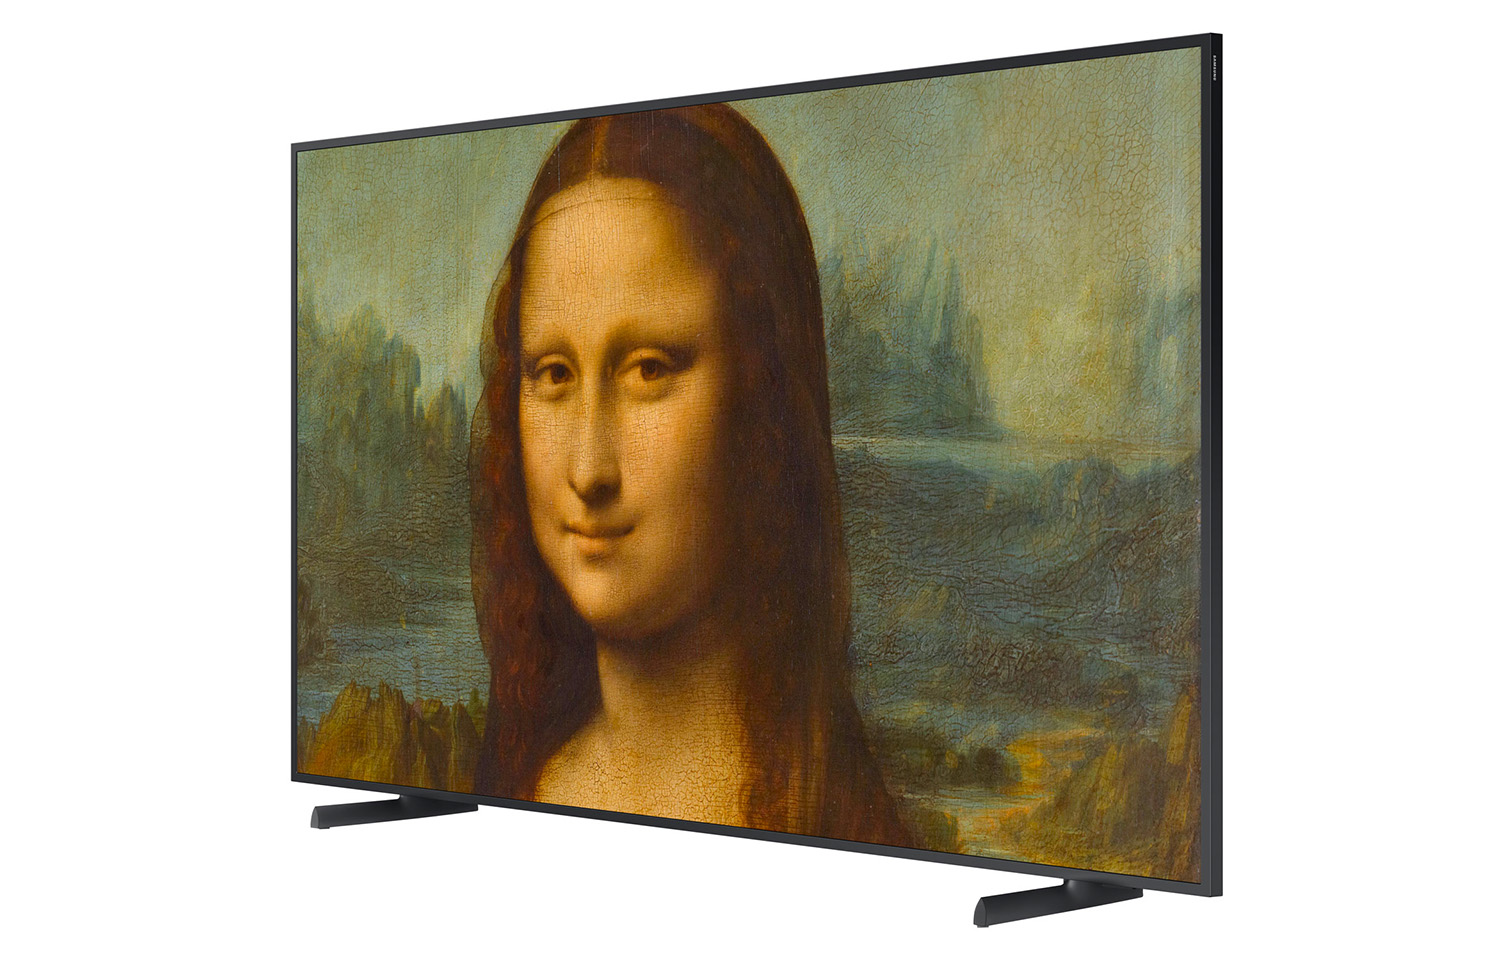 Samsung The Frame TV (2021) review: for fashion and function